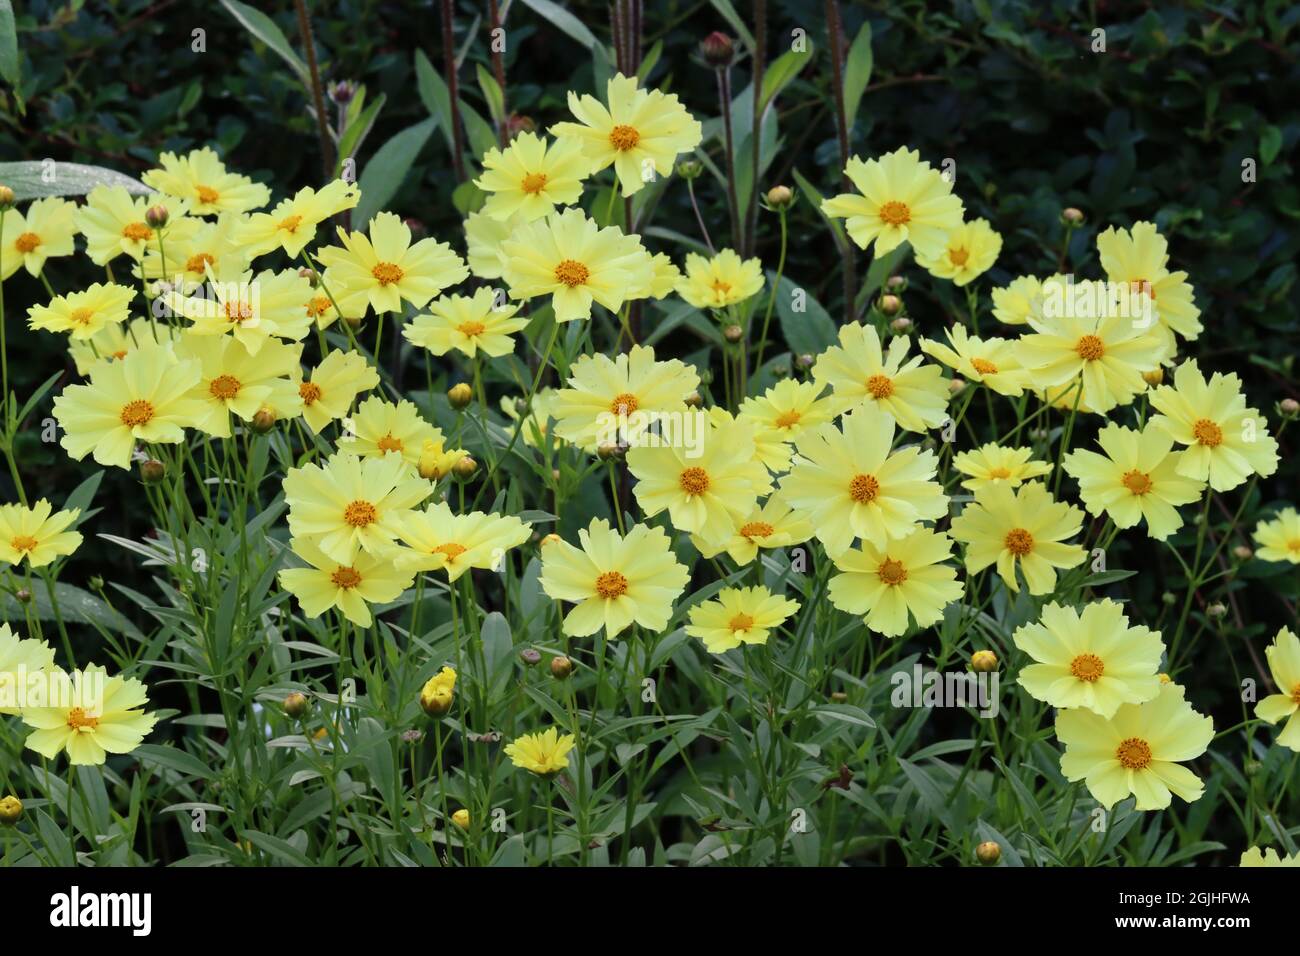 Photo of a flower bed with lush blooming light yellow coreopsis lanceolata flowers Stock Photo